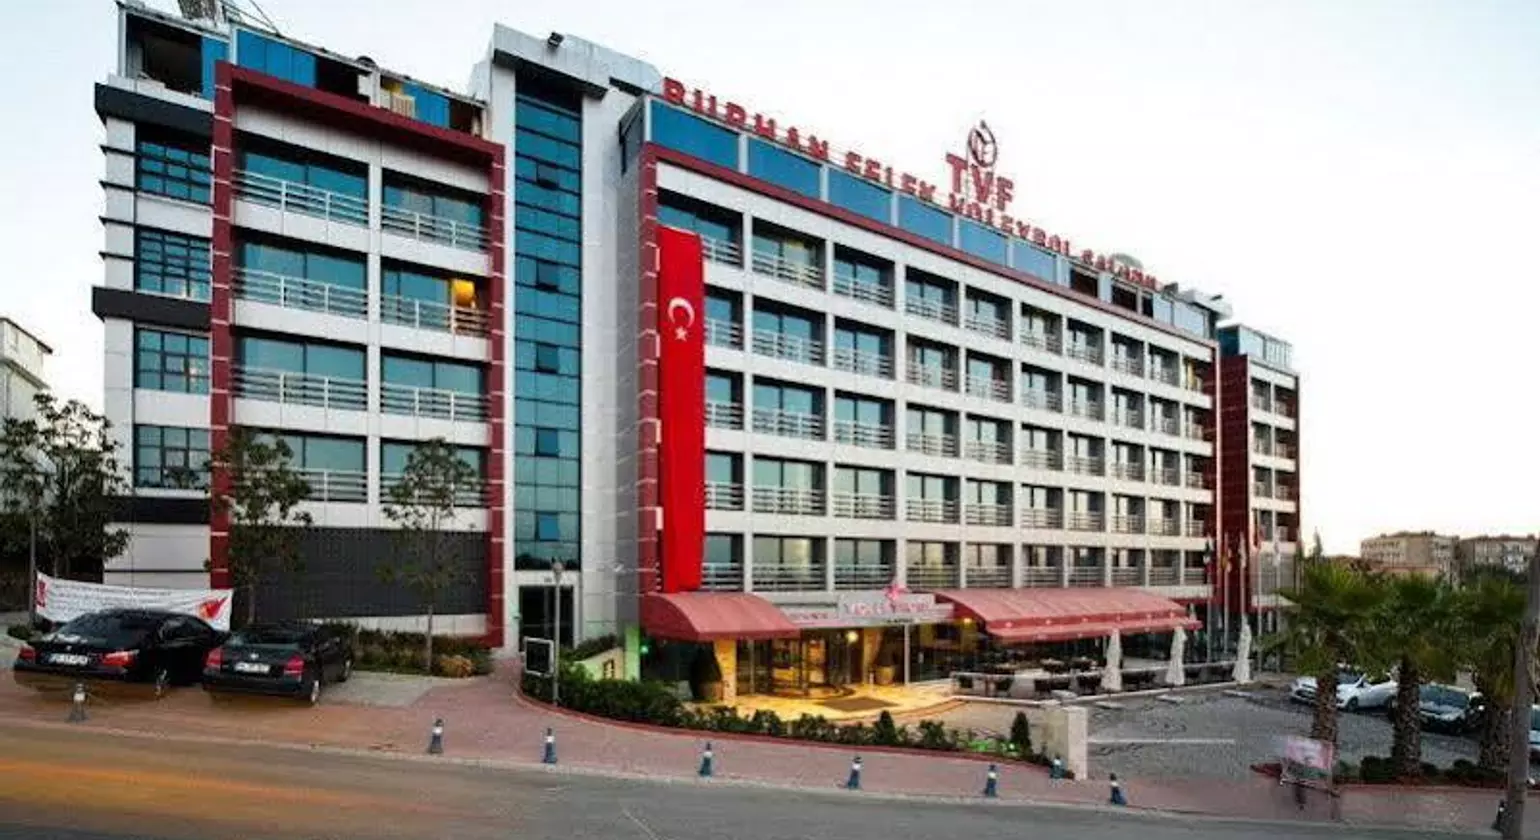 Volley Hotel Istanbul